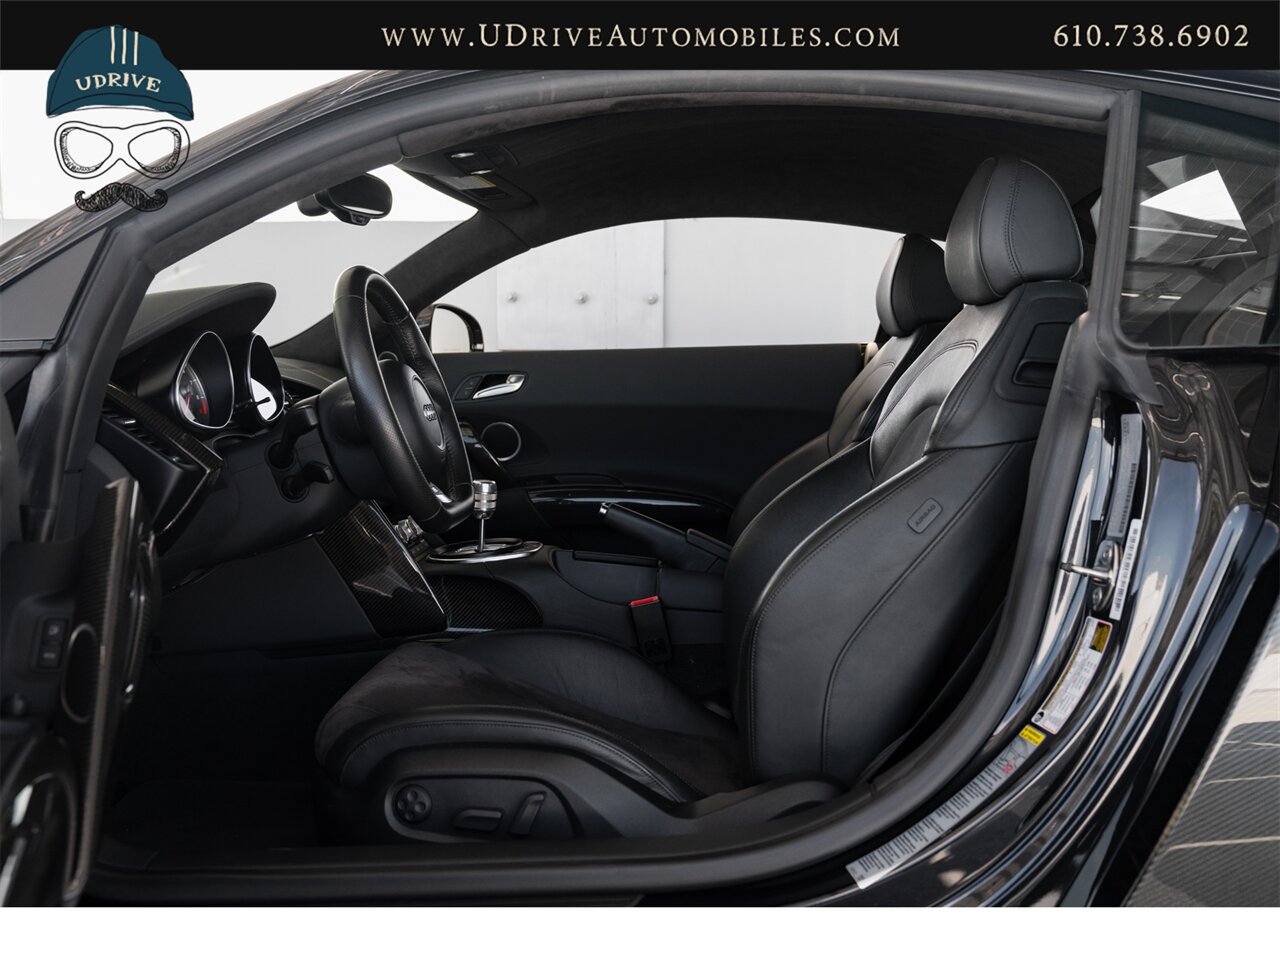 2012 Audi R8 4.2 Quattro  6 Speed Manual 1 Owner Service History - Photo 30 - West Chester, PA 19382